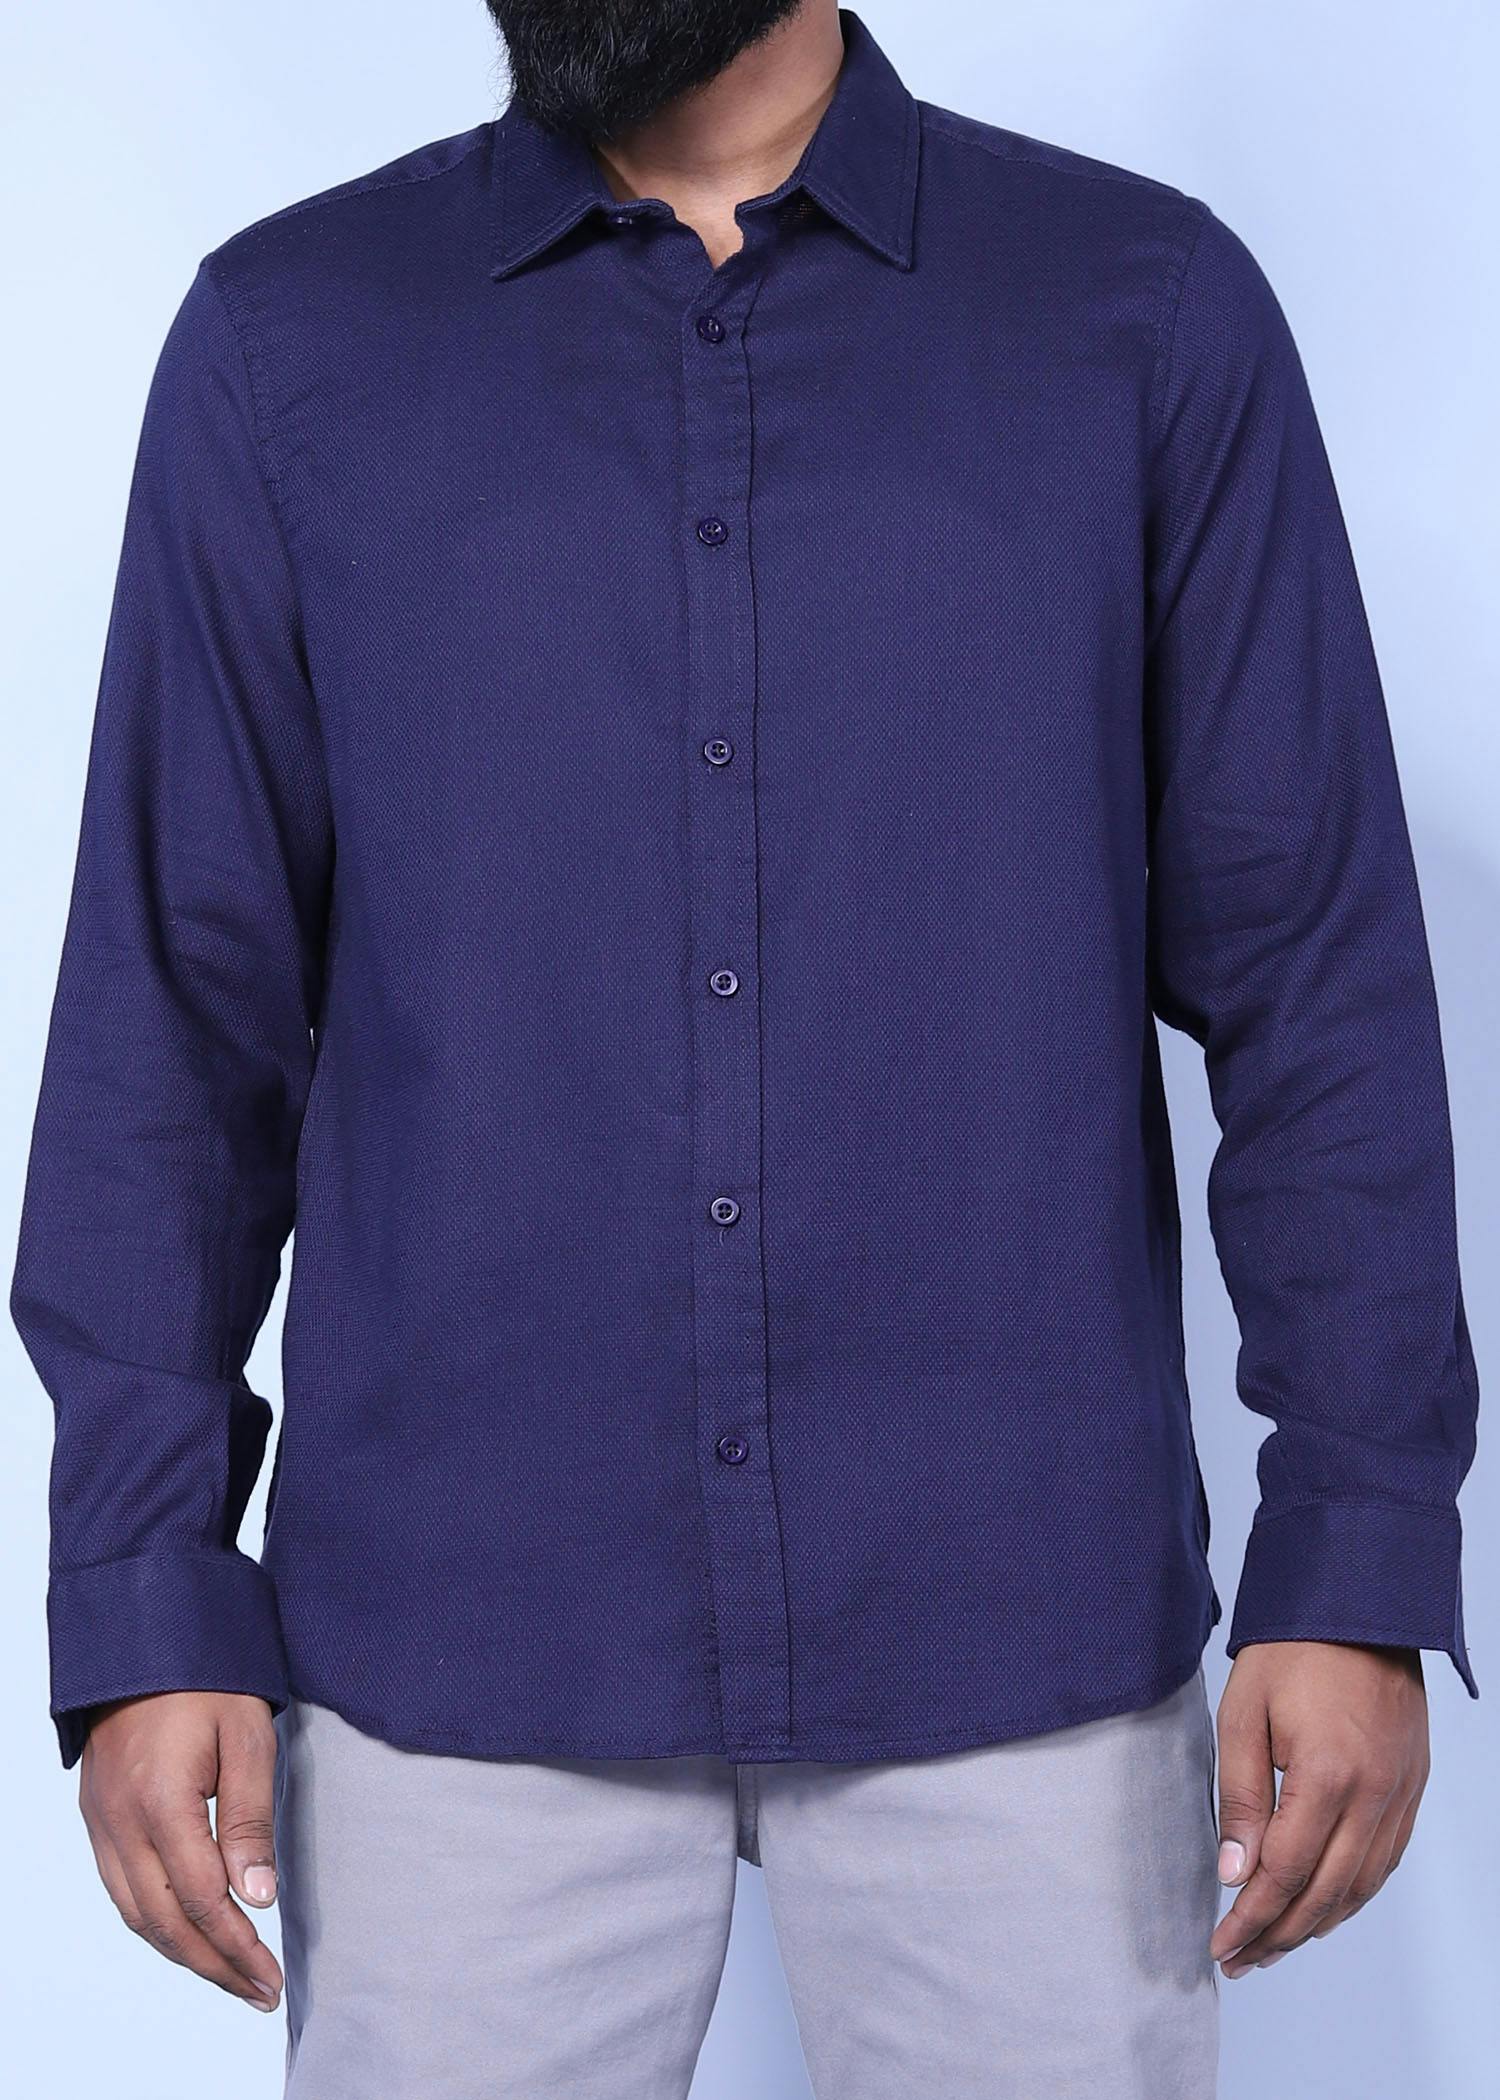 istanbul xv fs shirt navy color facecropped